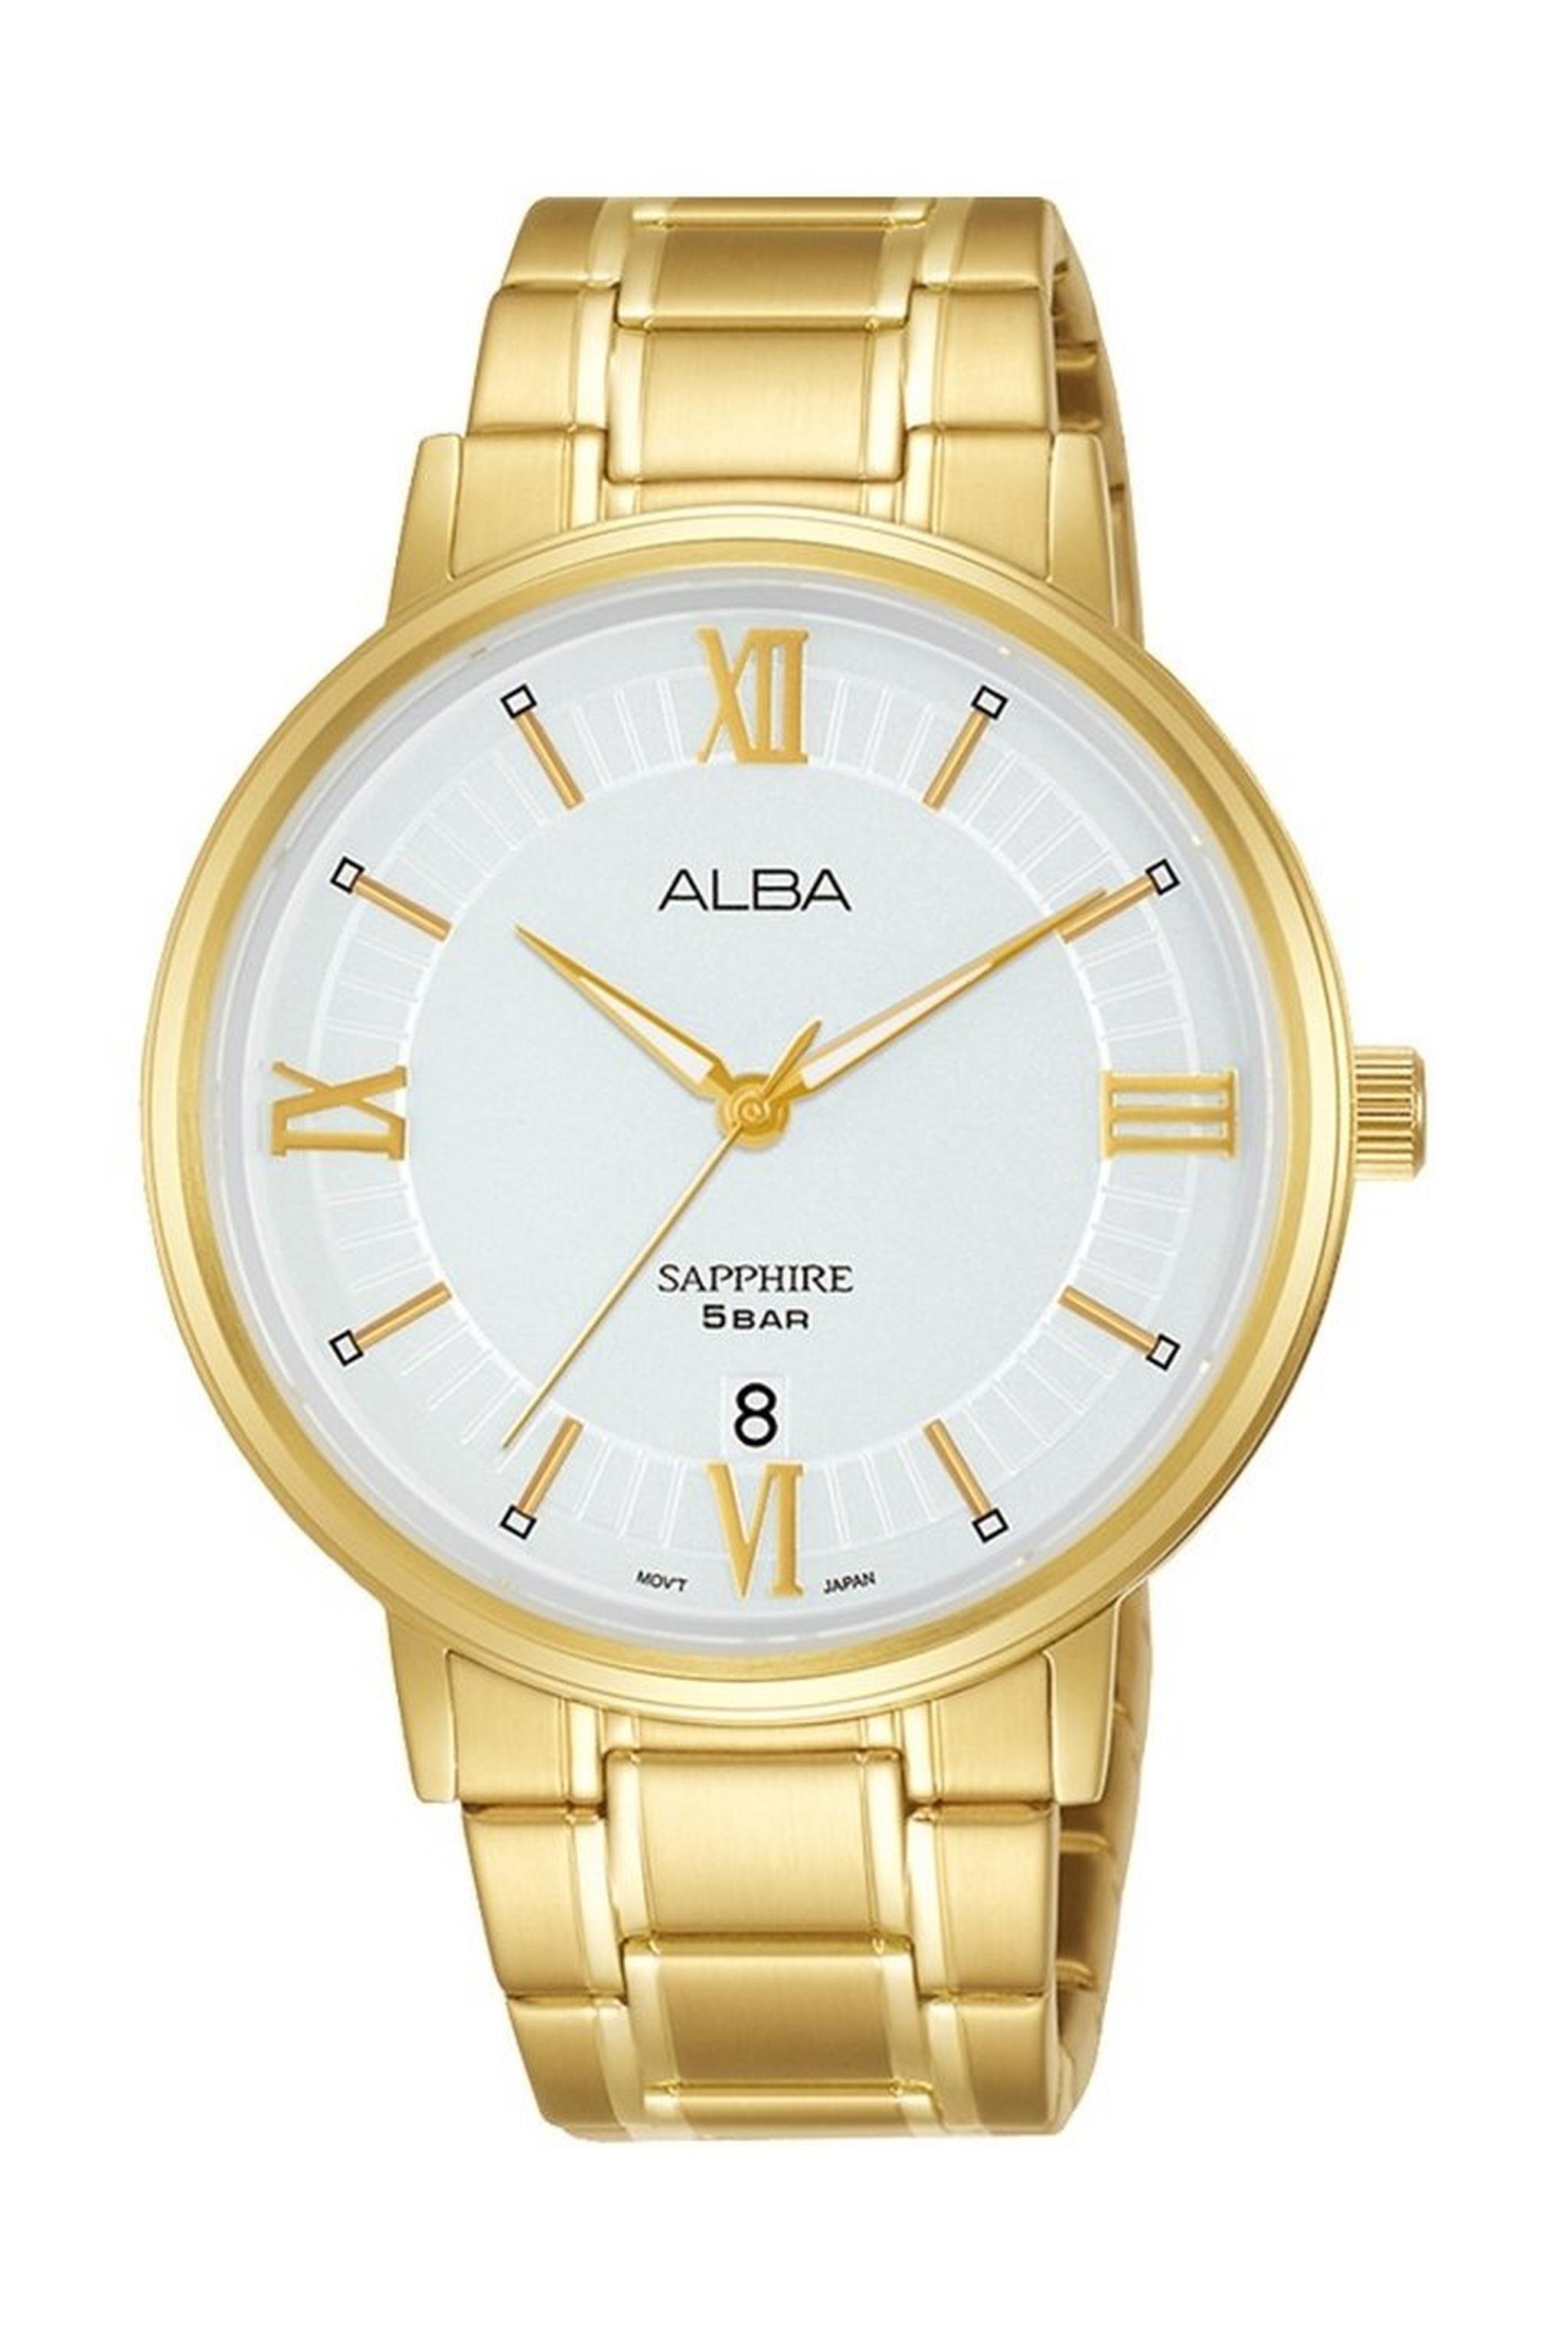 Alba 41mm Gent's Metal Analog Casual Watch - AS9L20X1